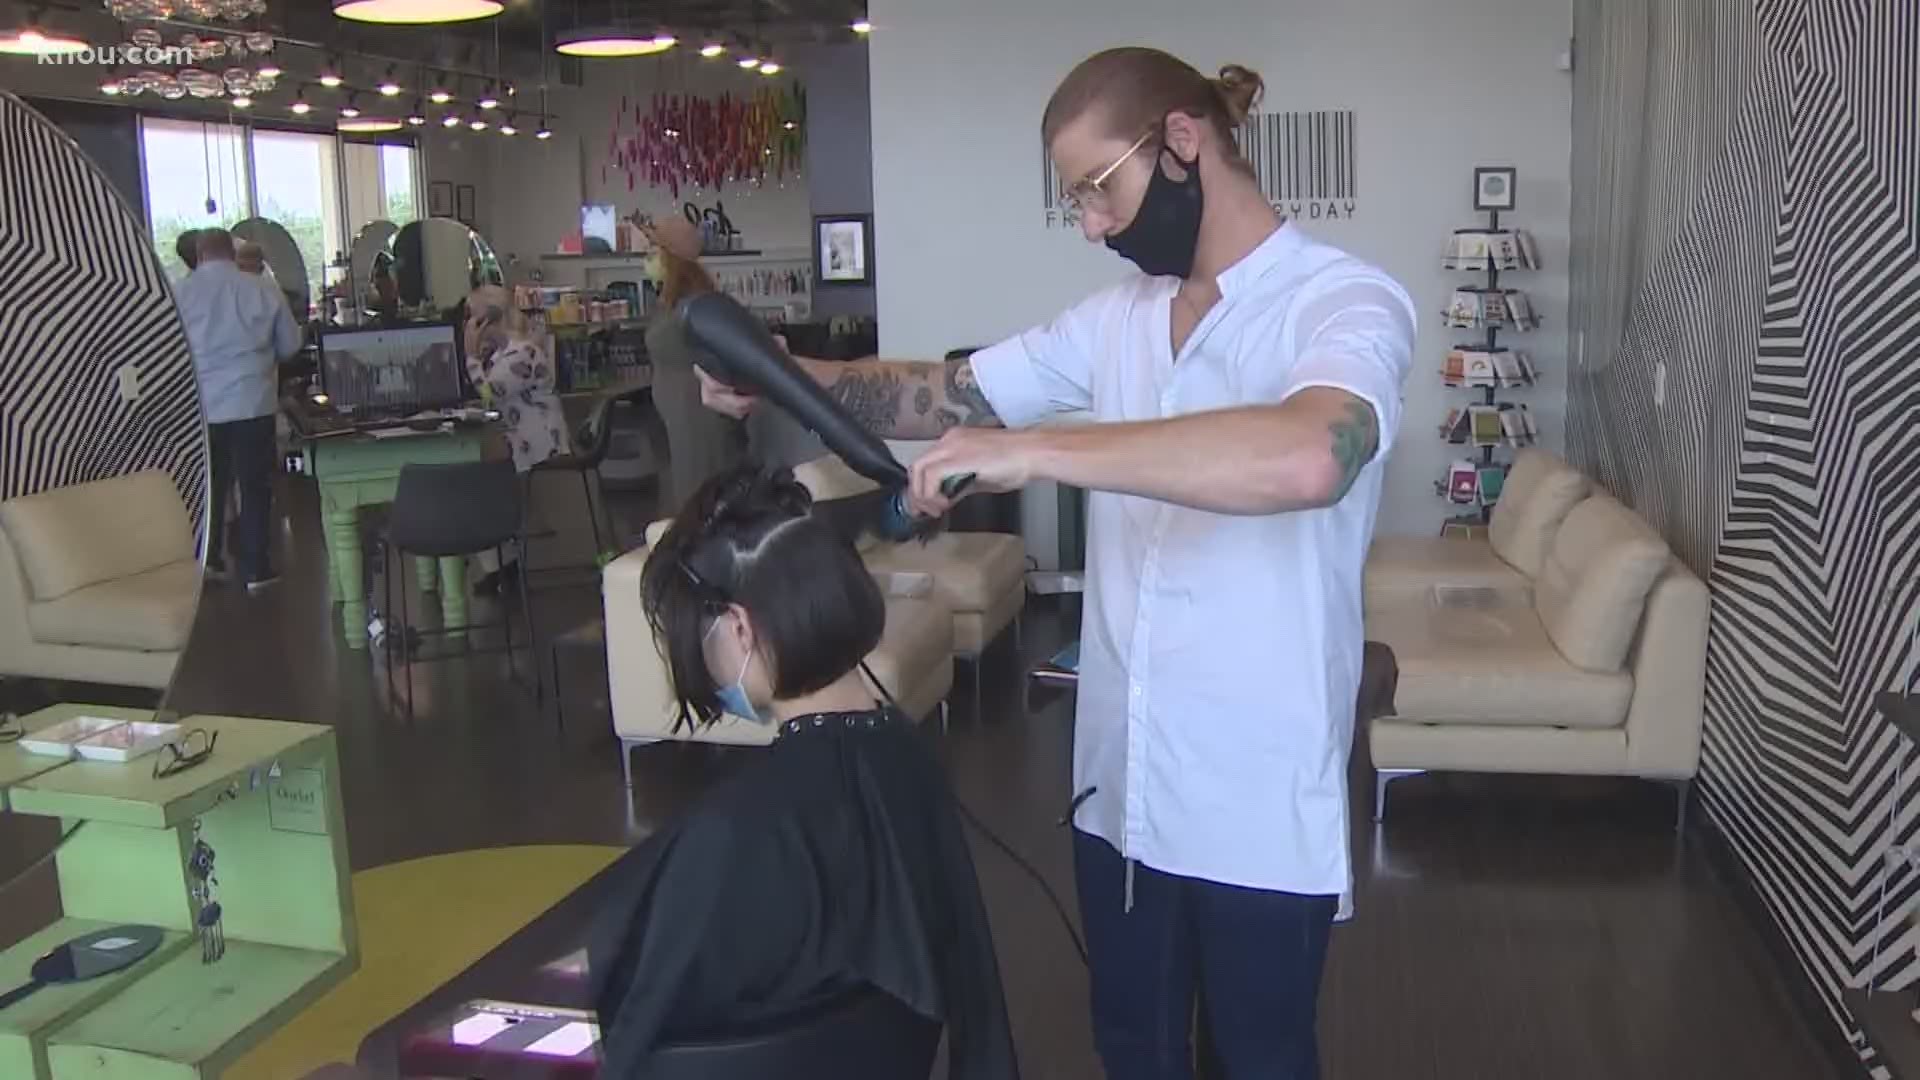 People are flocking to hair salons and barber shops that are reopening under Gov. Greg Abbott's executive order.